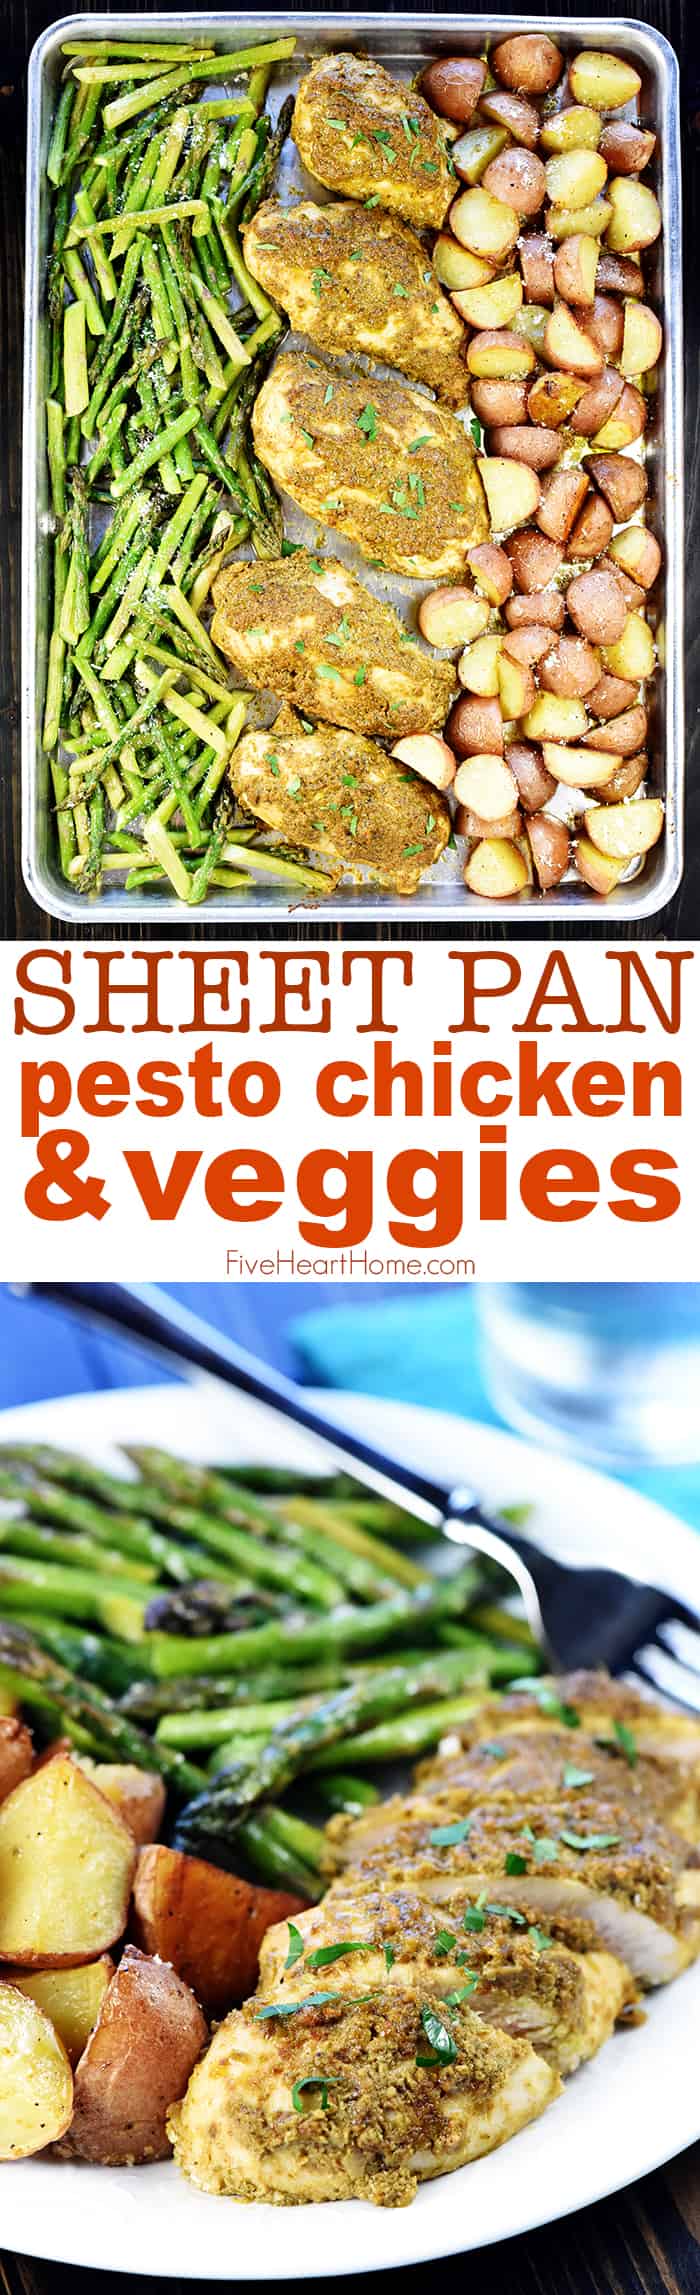 Sheet Pan Chicken and Veggies ~ a flavorful, quick and easy, complete dinner recipe that bakes up on just one pan, featuring pesto-coated chicken breasts and roasted potatoes and asparagus! | FiveHeartHome.com via @fivehearthome